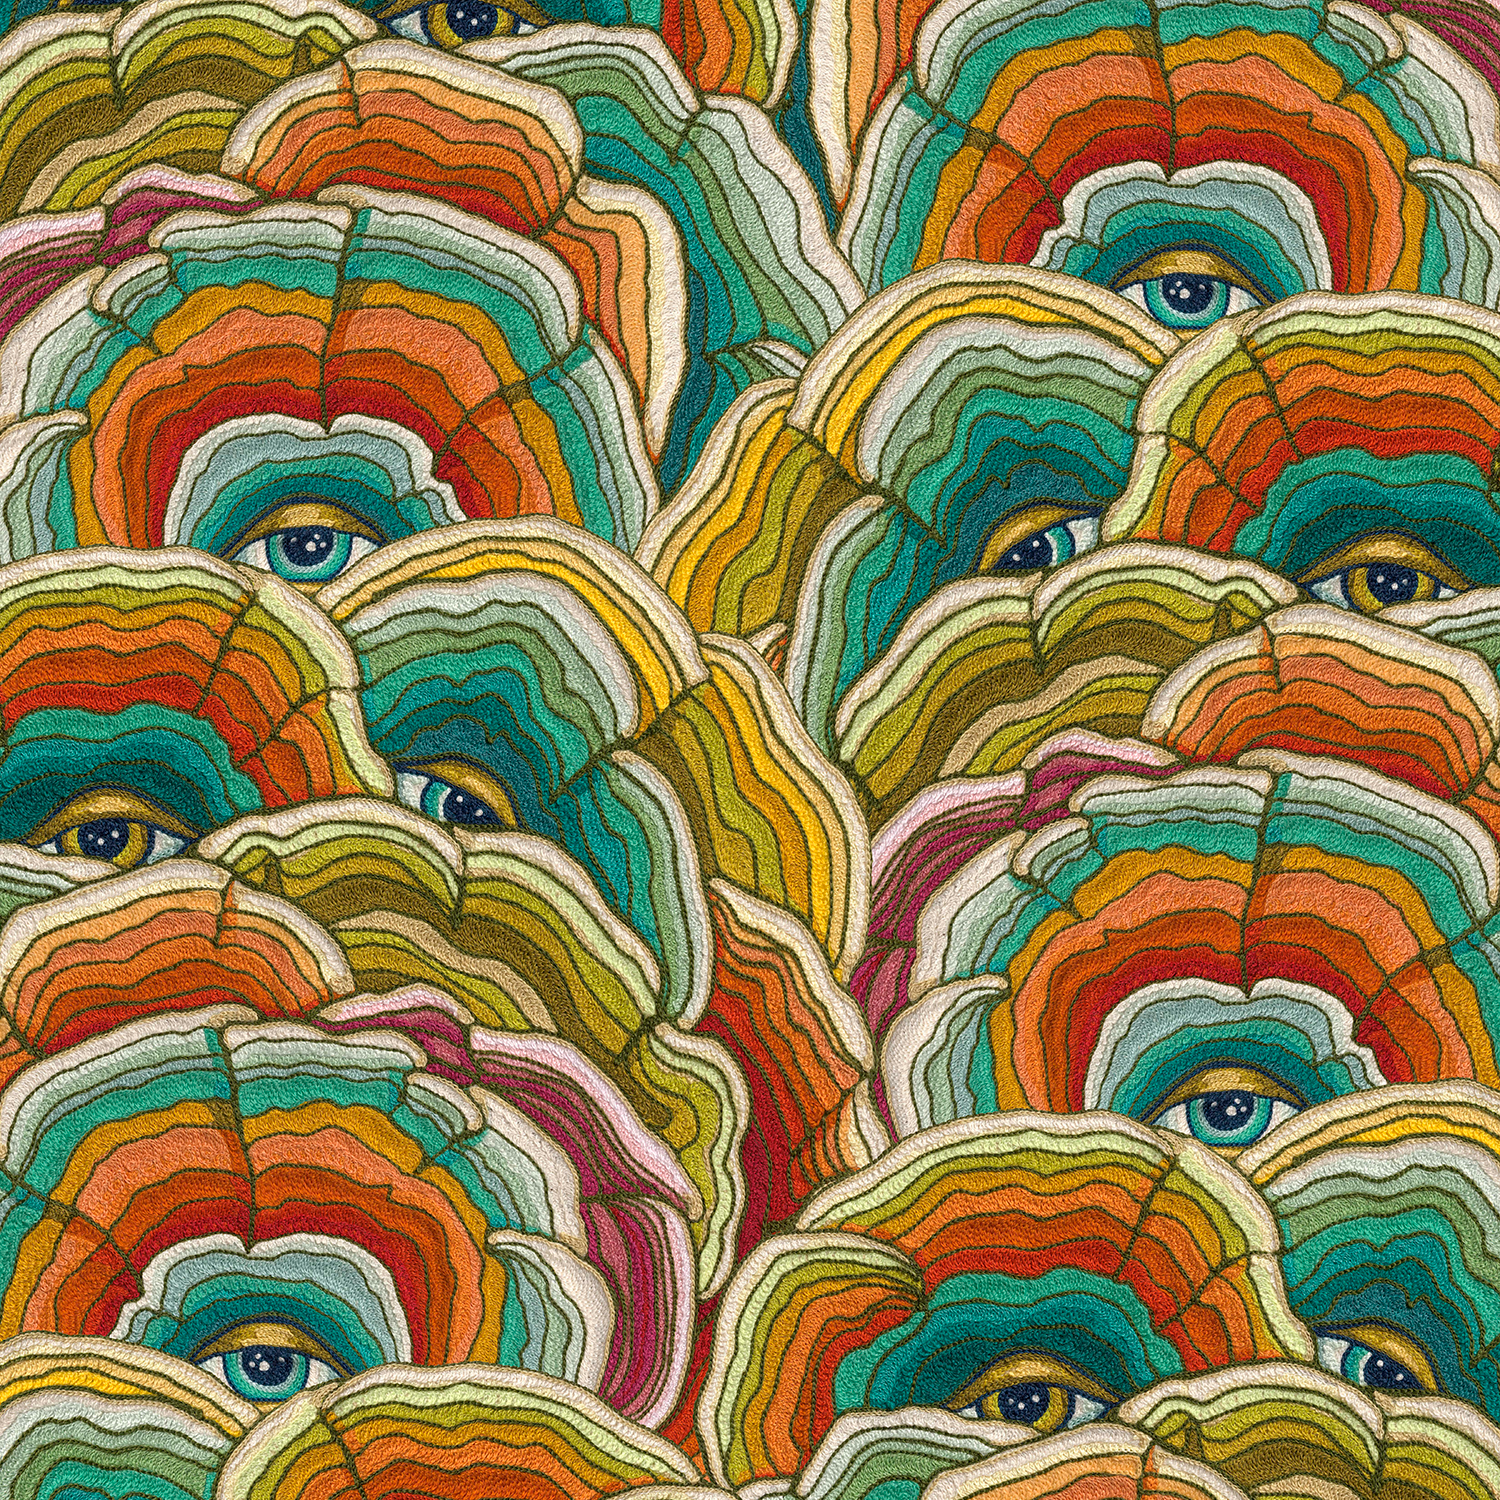 Detail of a psychedelic pattern with organic rainbow stripes surrounding eyes 